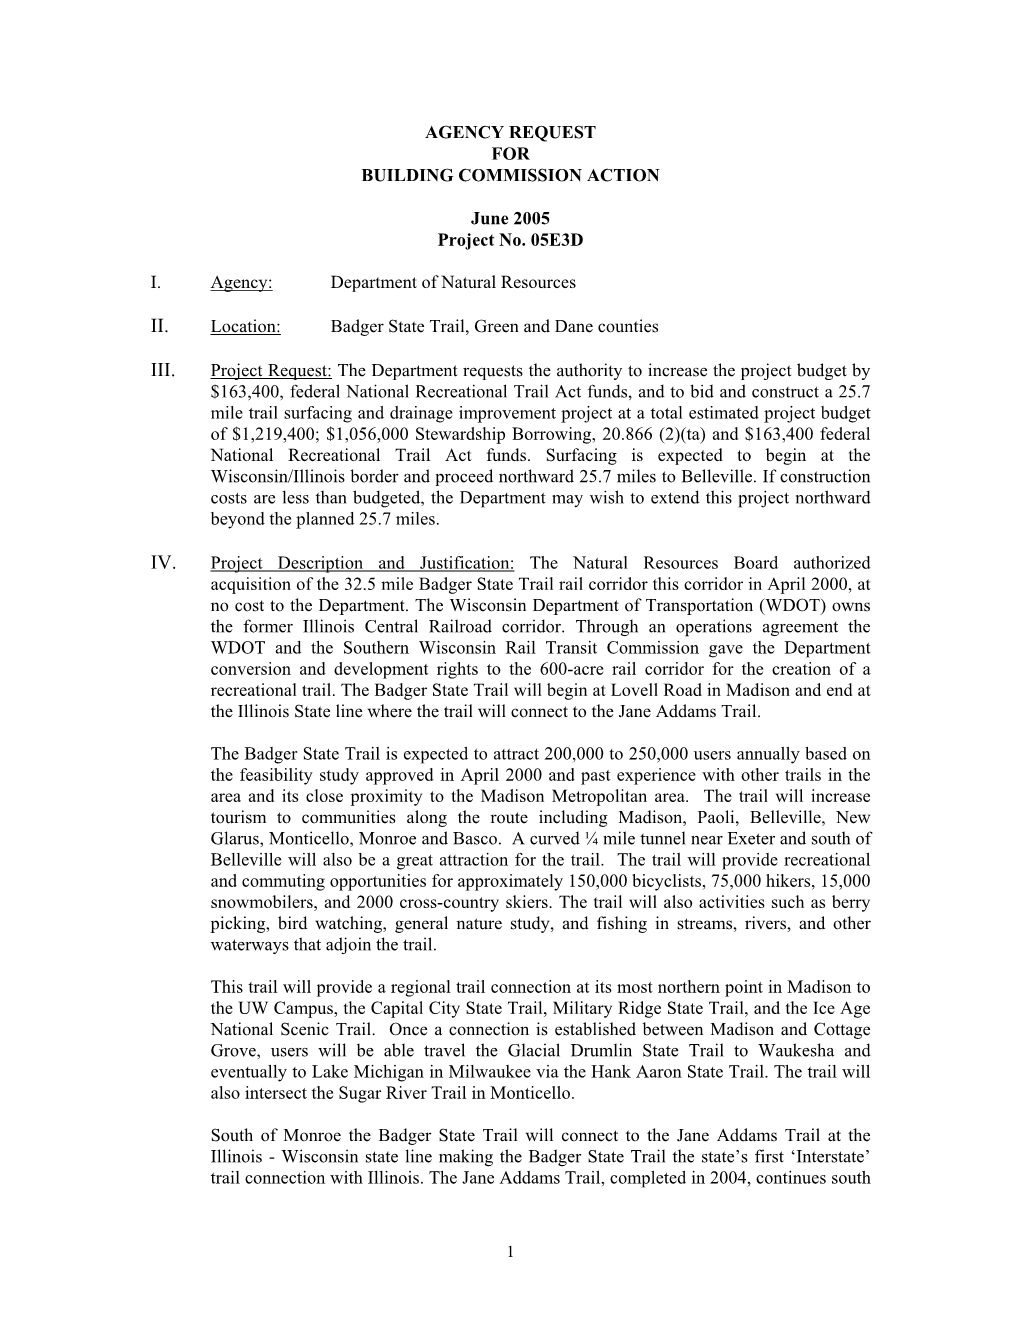 AGENCY REQUEST for BUILDING COMMISSION ACTION June 2005